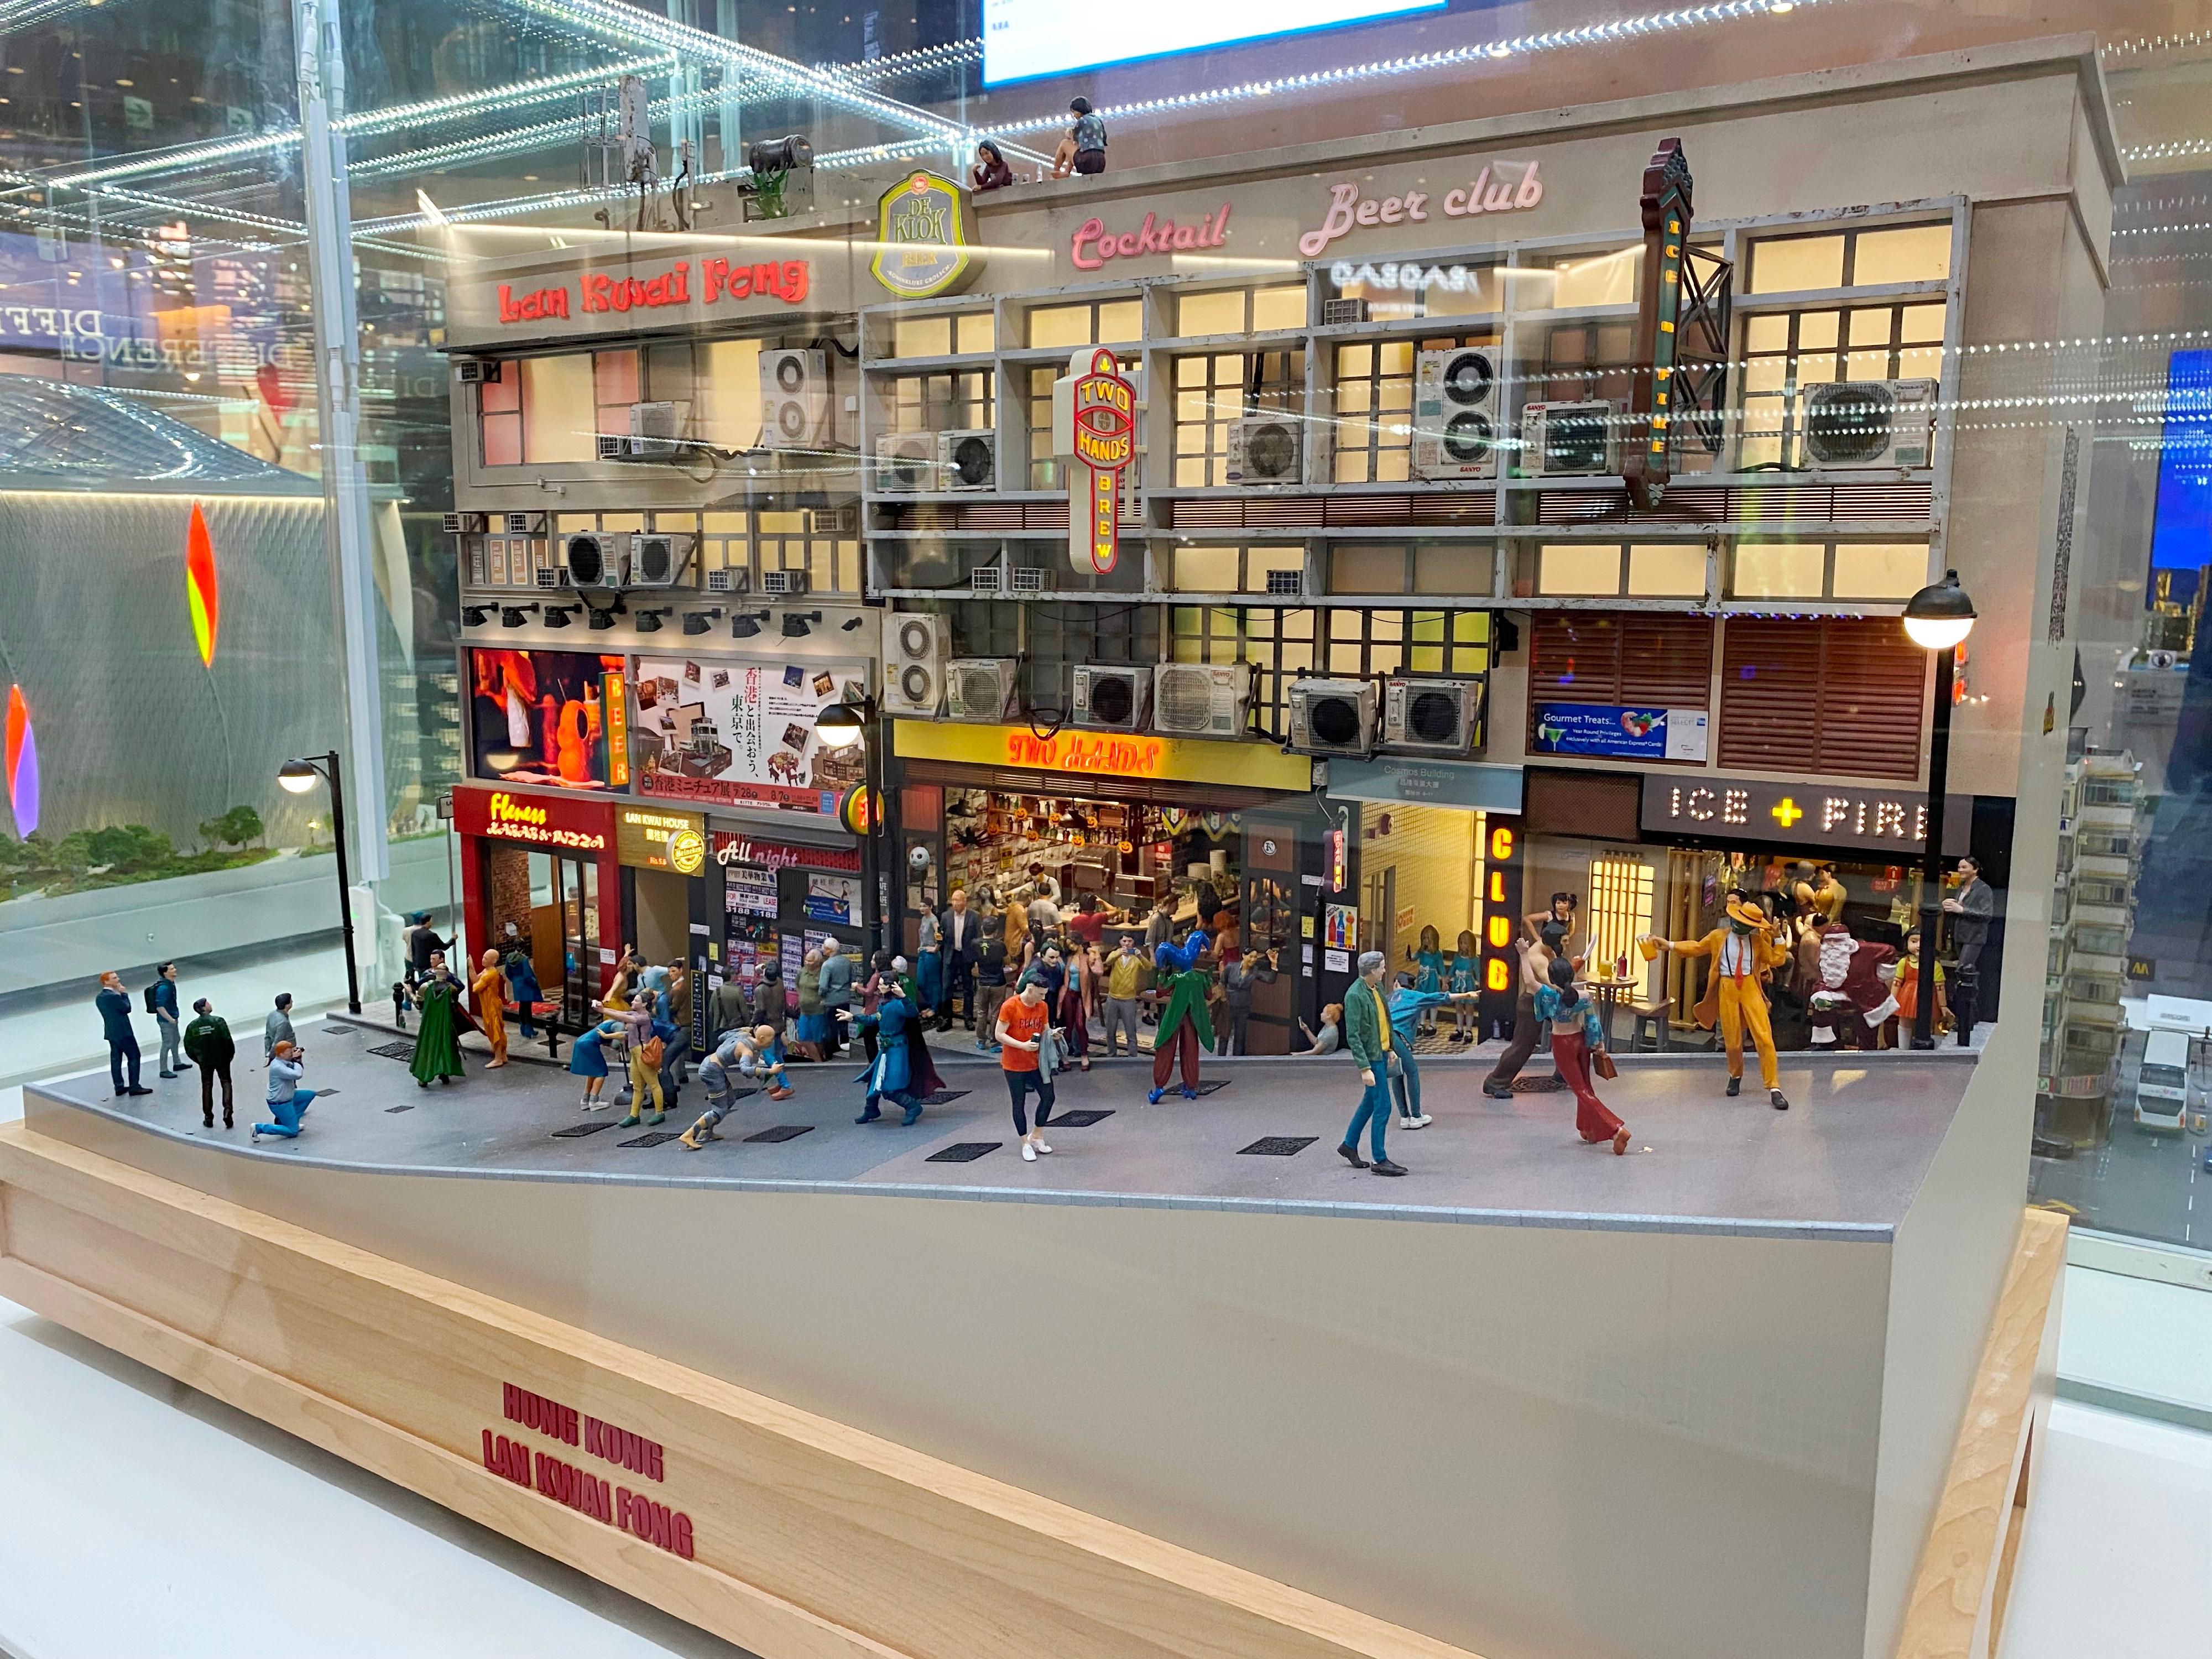 "Hong Kong in Miniature" Exhibition @Tokyo 2022, which showcases 40 miniature models that capture the uniqueness and vibrancy of Hong Kong, opened in Tokyo, Japan, today (July 28). Photo shows a miniature model of Lan Kwai Fong.